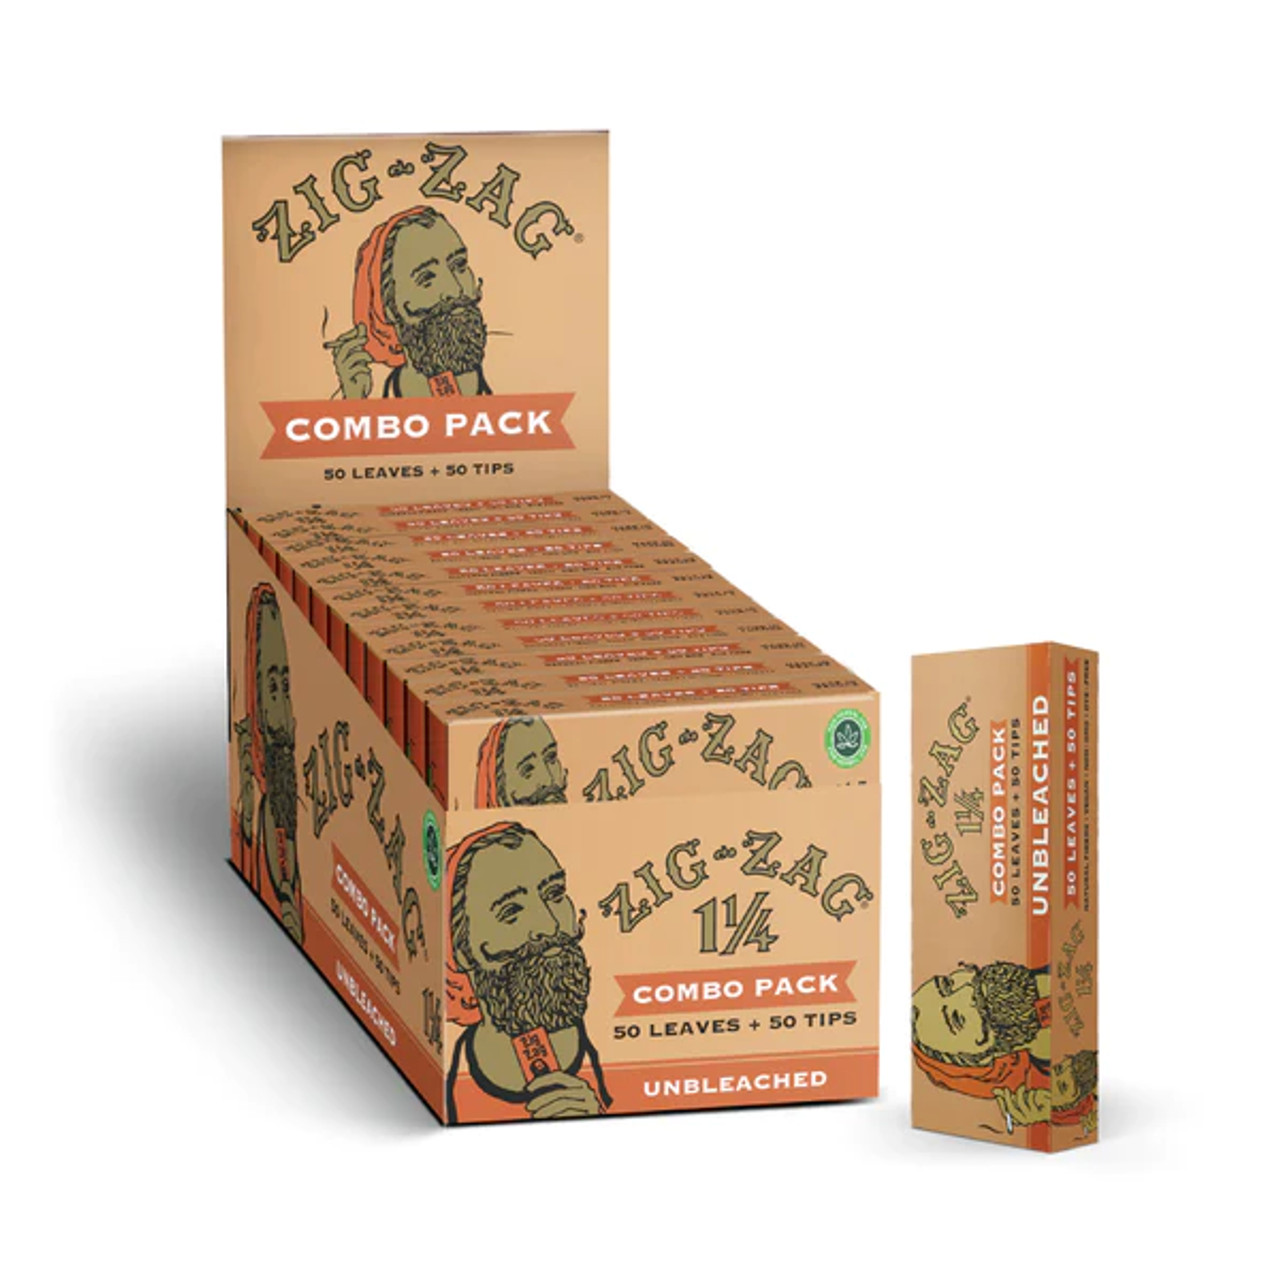 Zig-Zag Combo Pack 1 1/4 Unbleached Carton | 24ct | 50 Papers and Tips